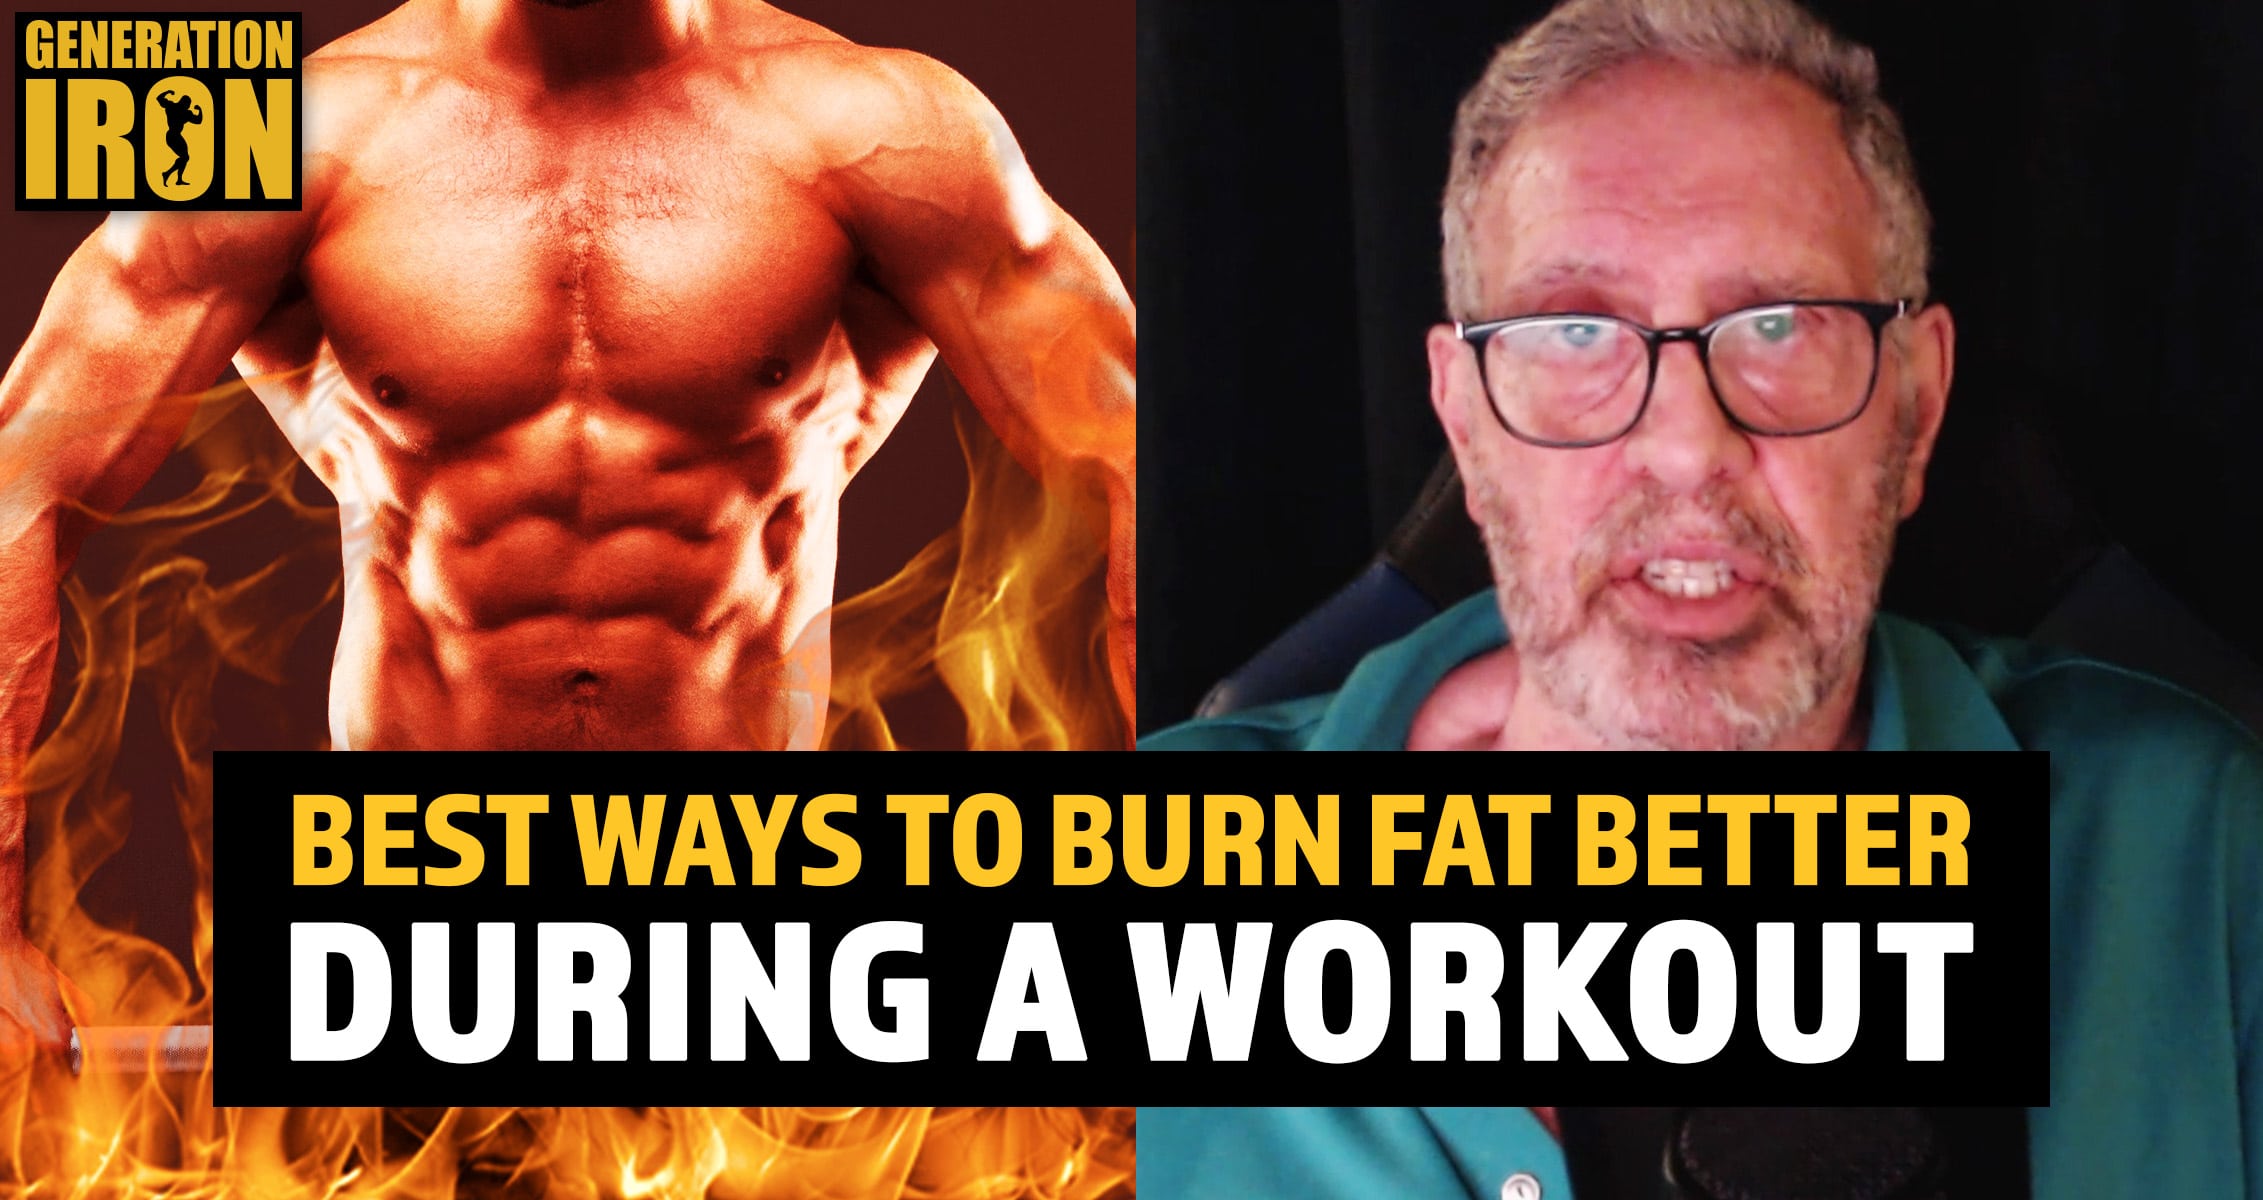 Straight Facts: What Determines How Much Fat You Burn During A Workout?